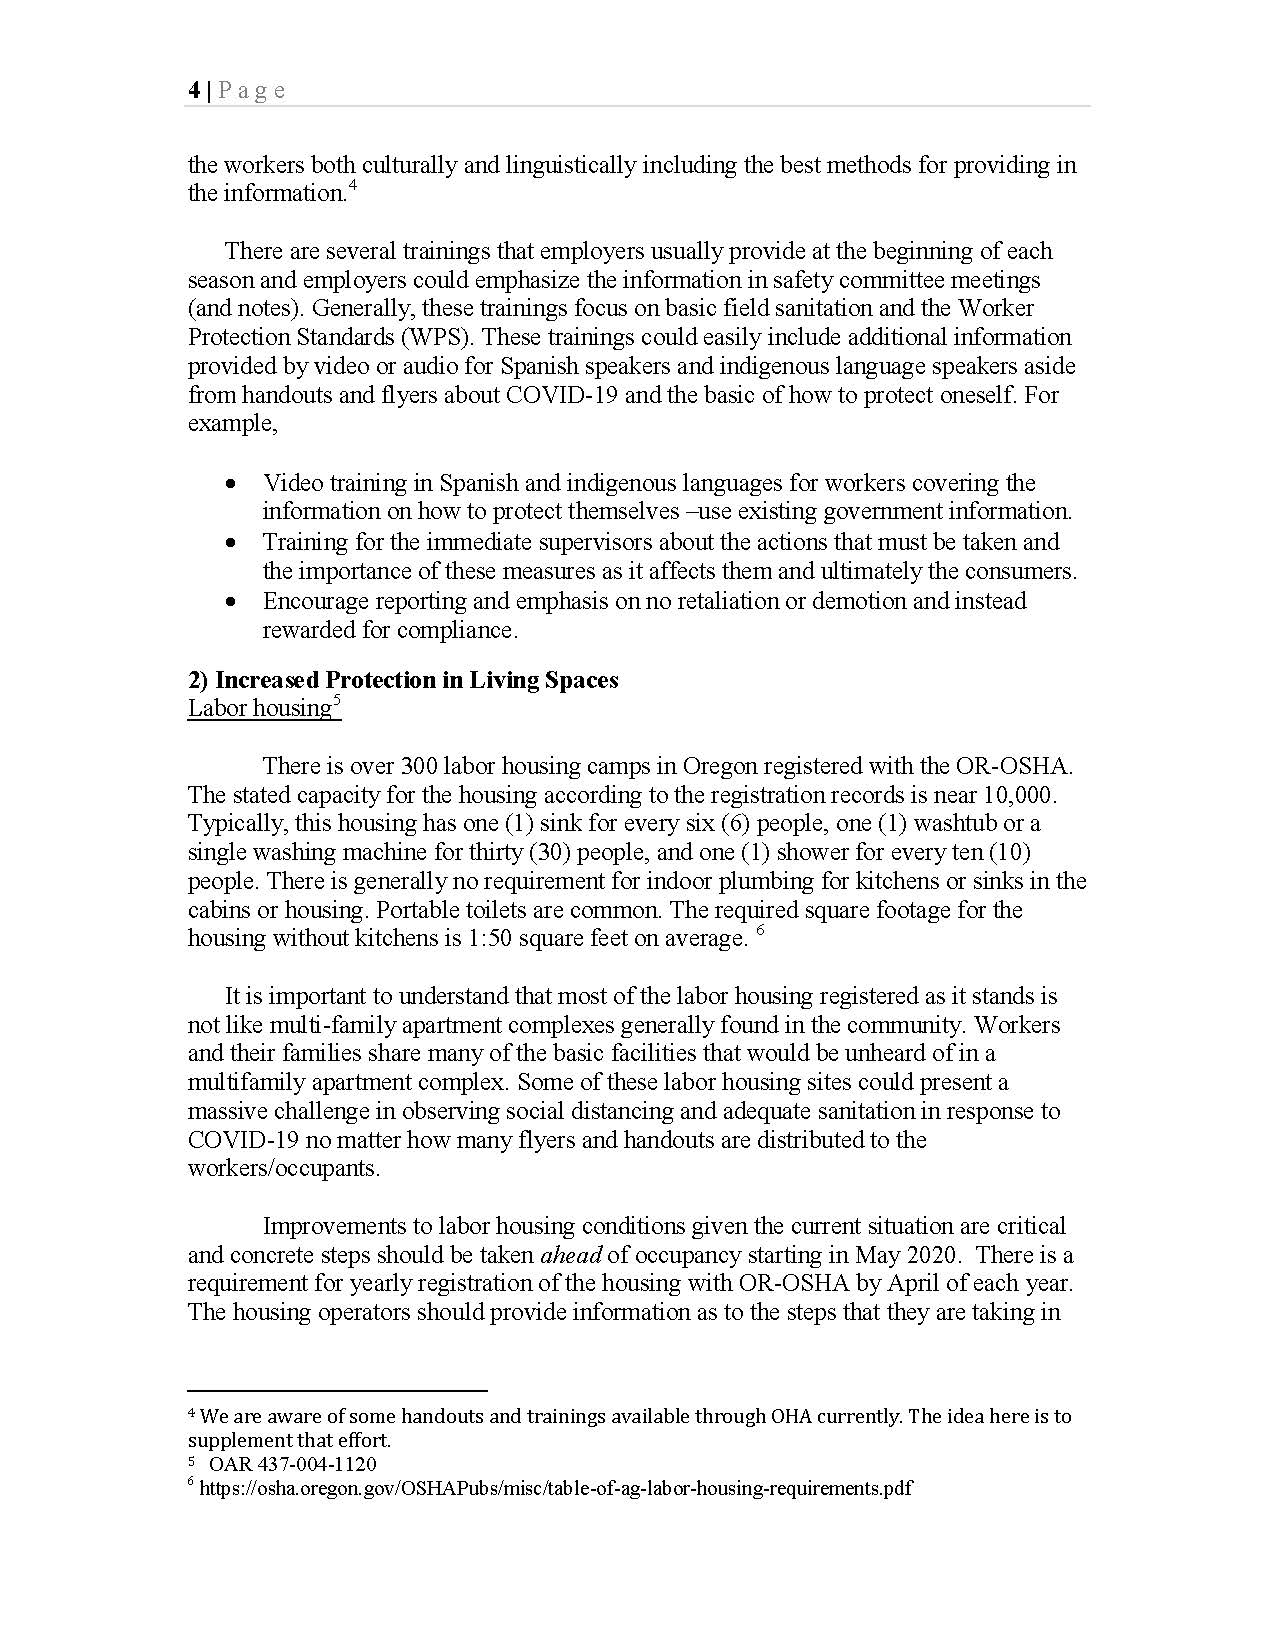 Page 4 of petition